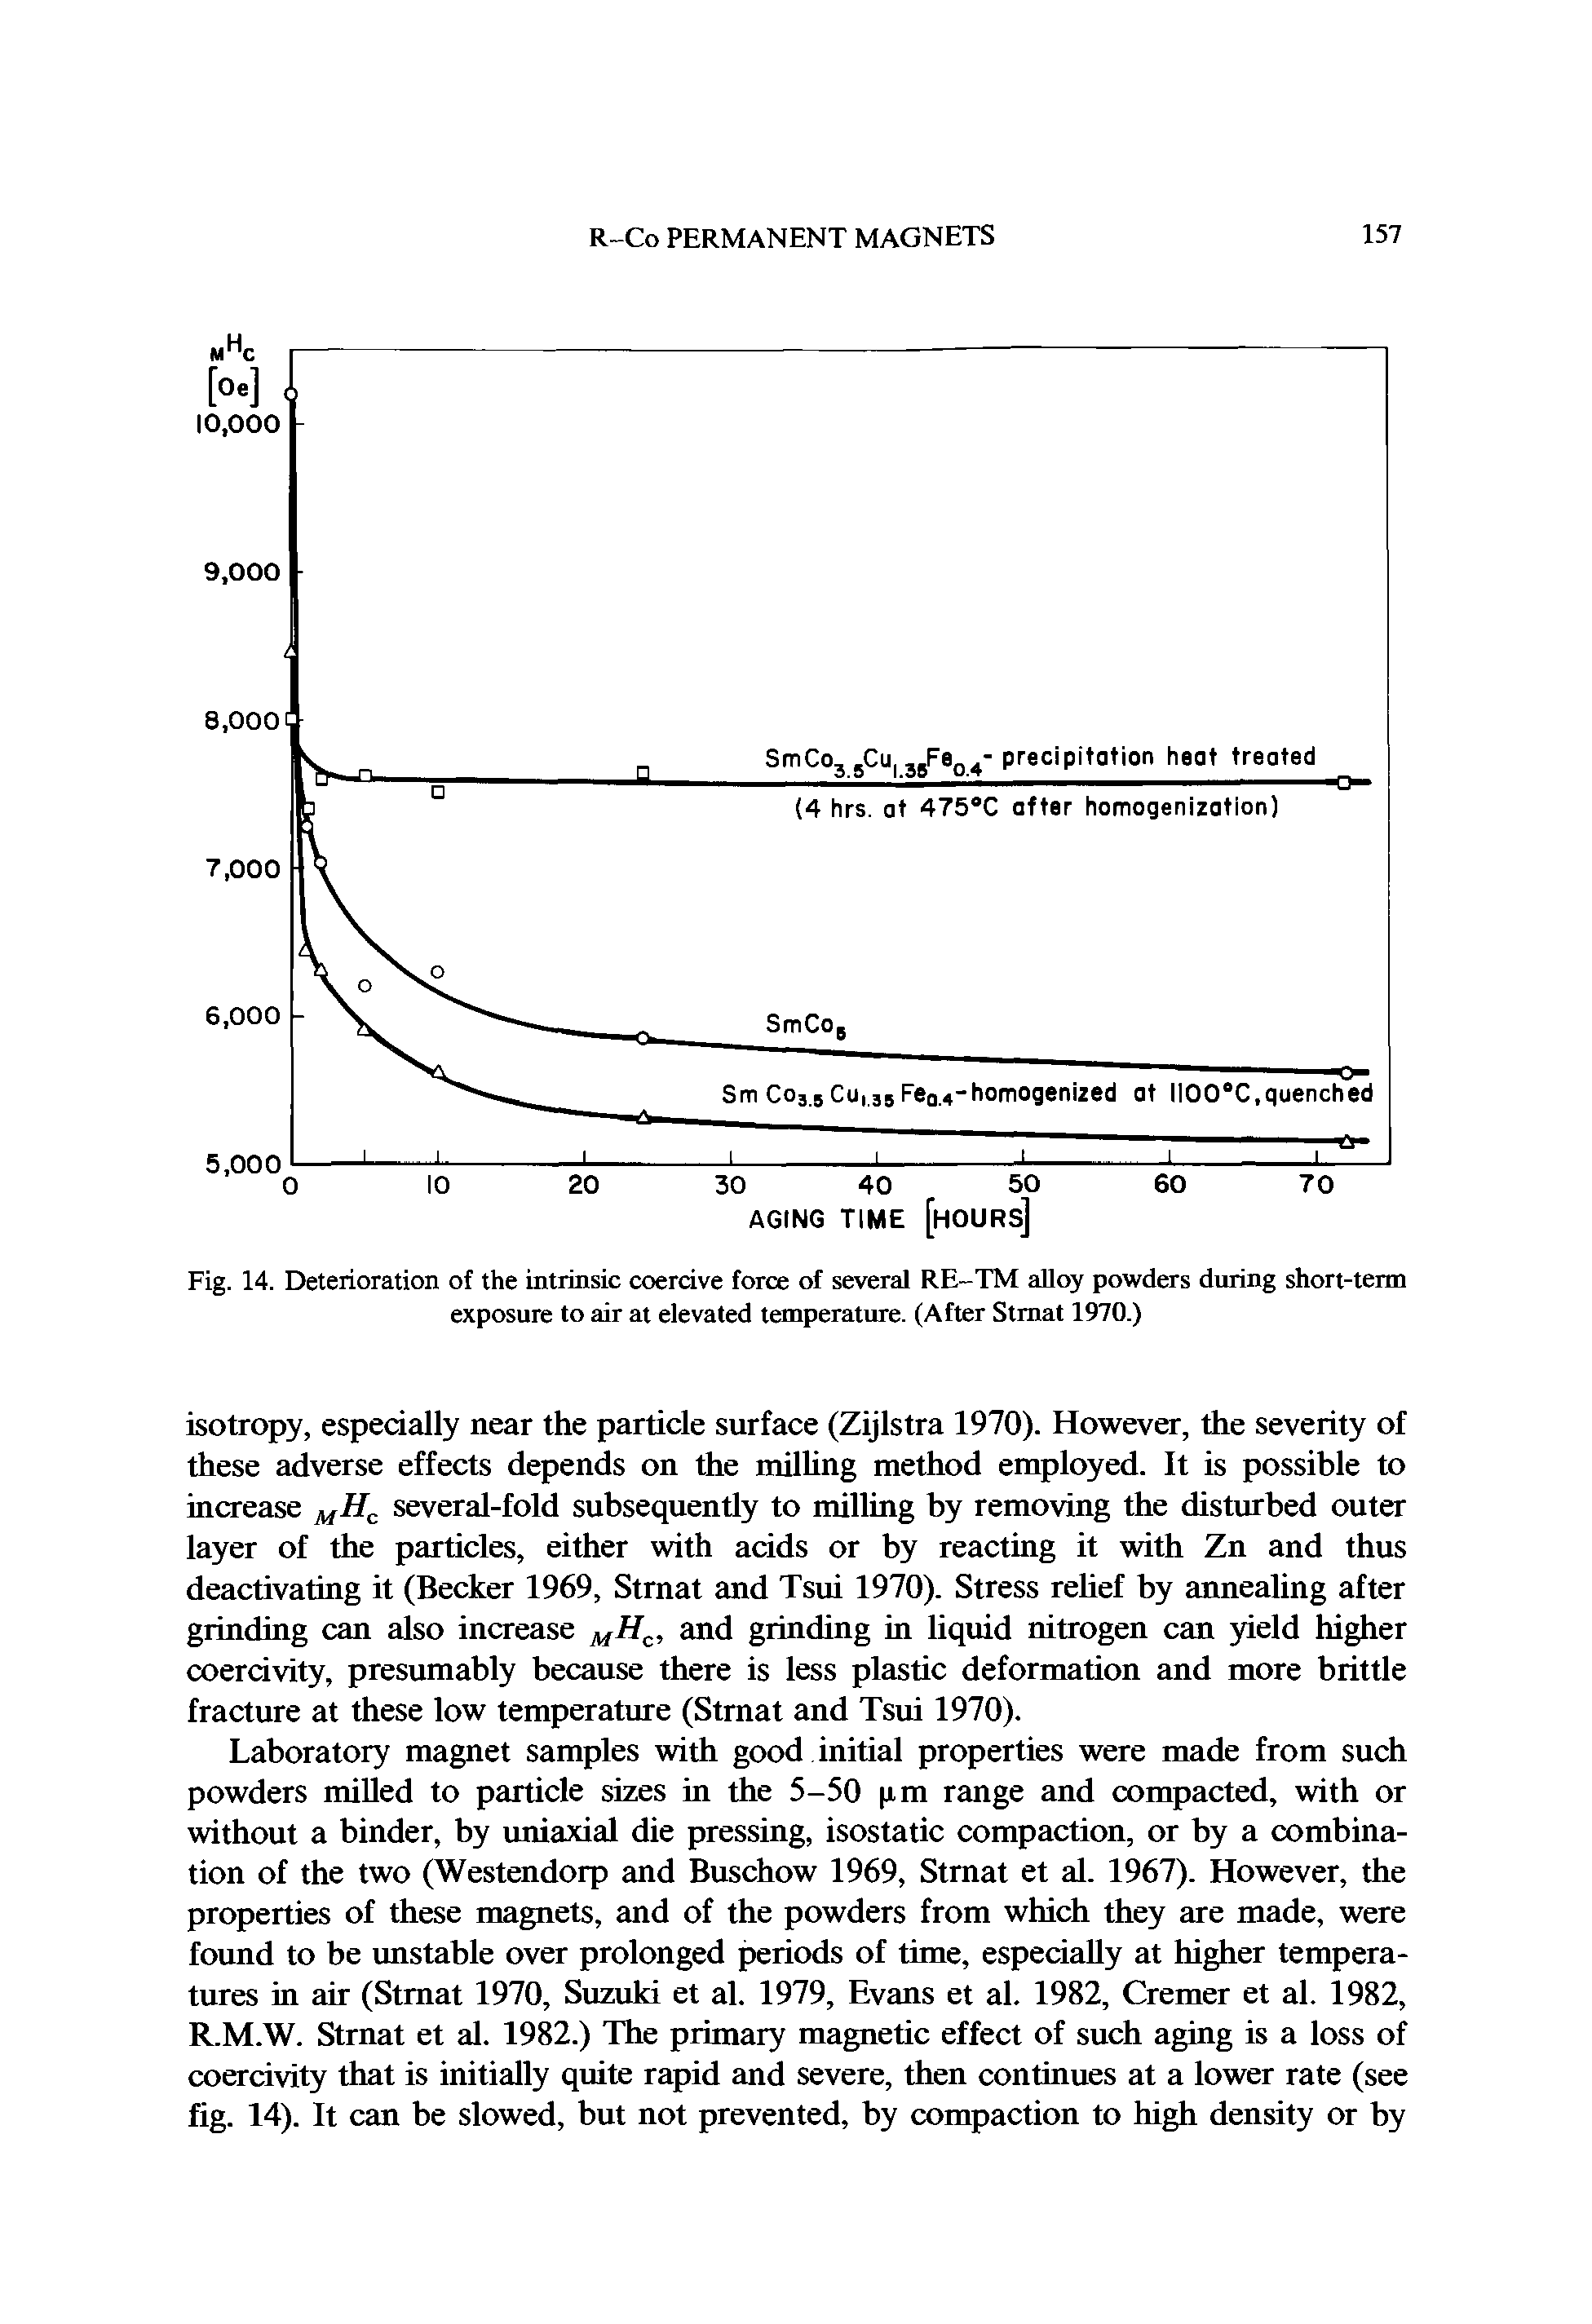 Fig. 14. Deterioration of the intrinsic coercive force of several RE-TM alloy powders during short-term exposure to air at elevated temperature. (After Stmat 1970.)...